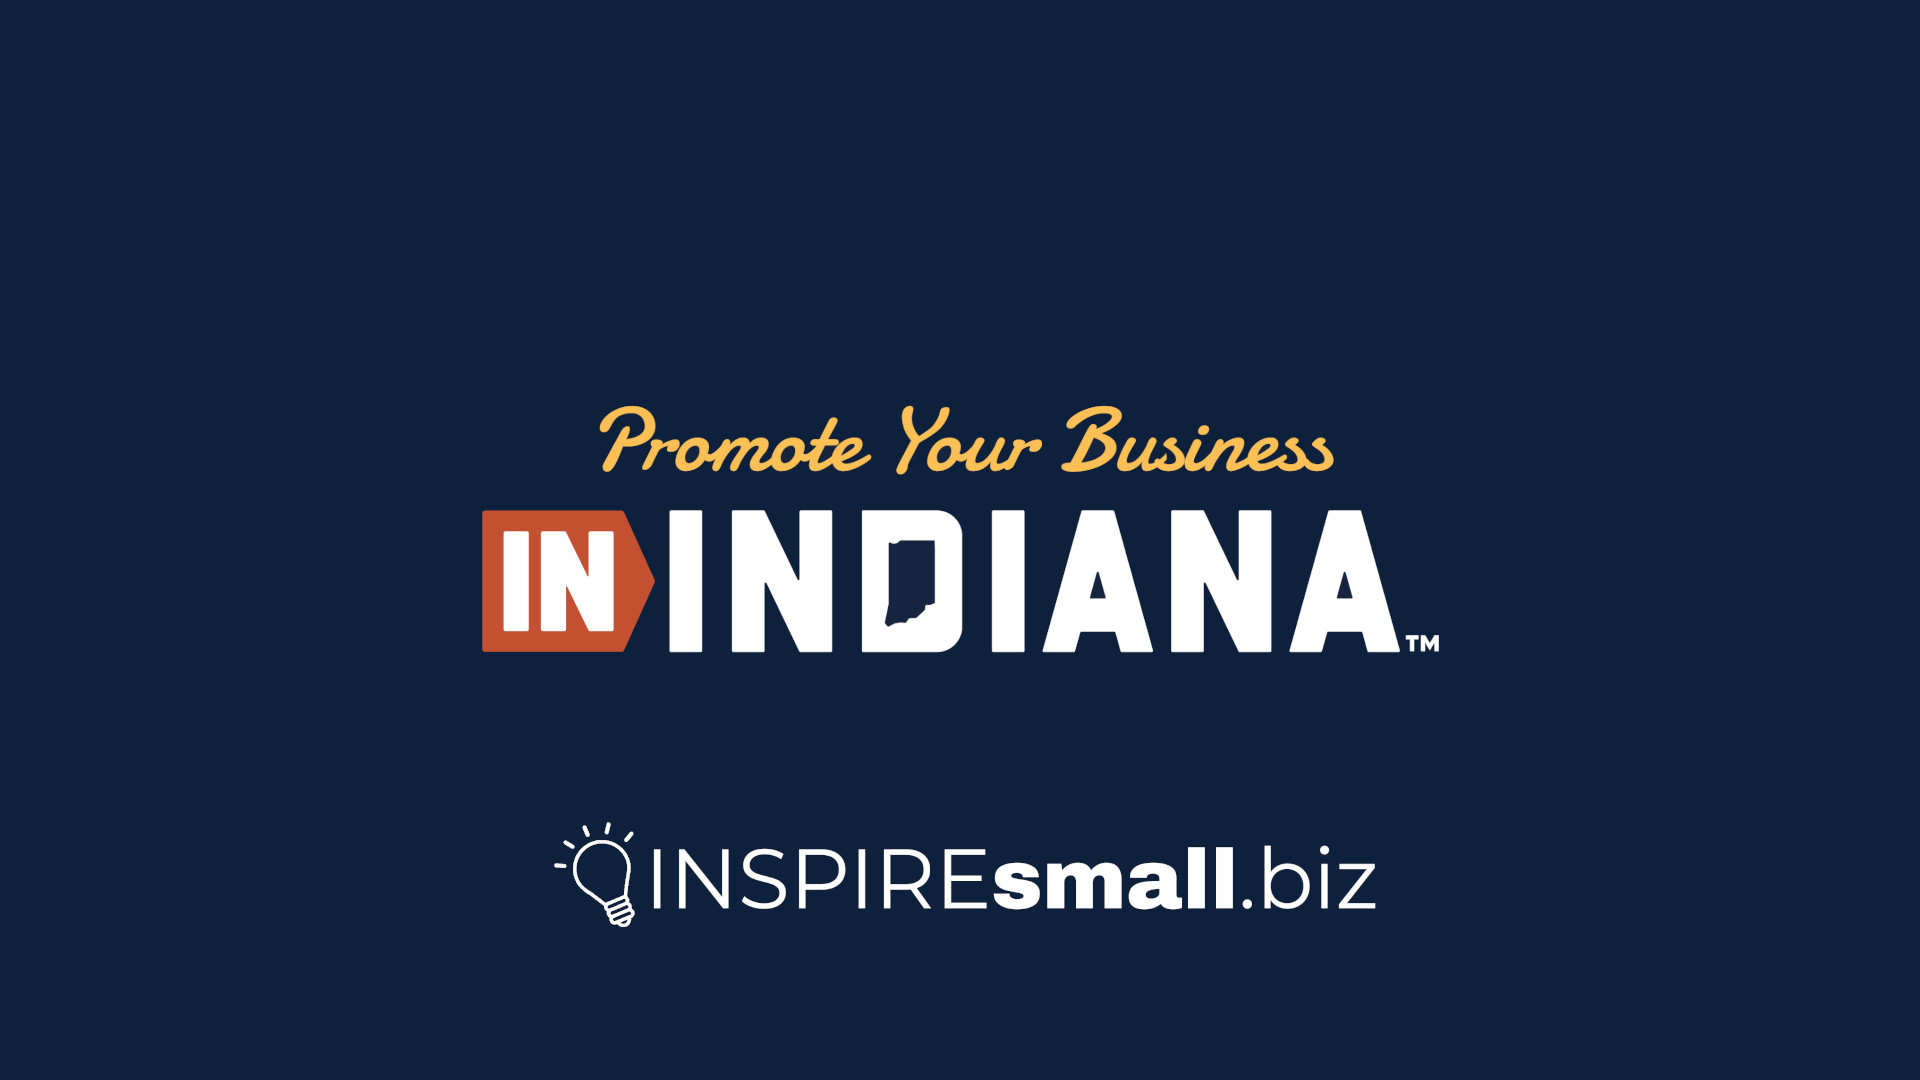 Creating Your ‘In Indiana’ Campaign